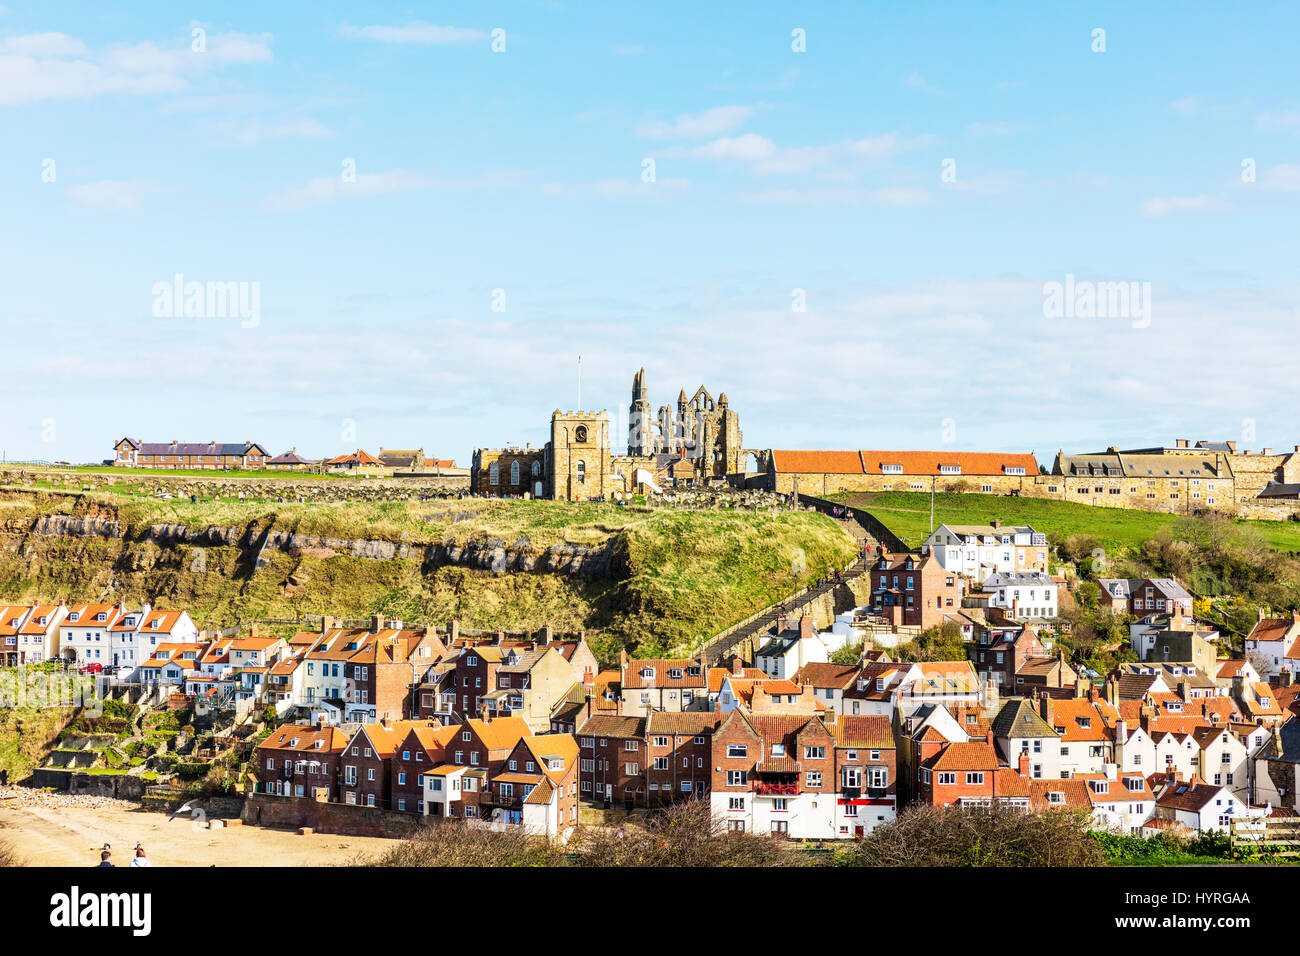 Whitby Abbey Whitby church Whitby town Whitby town Yorkshire UK England abbeys churches homes houses Stock Photo